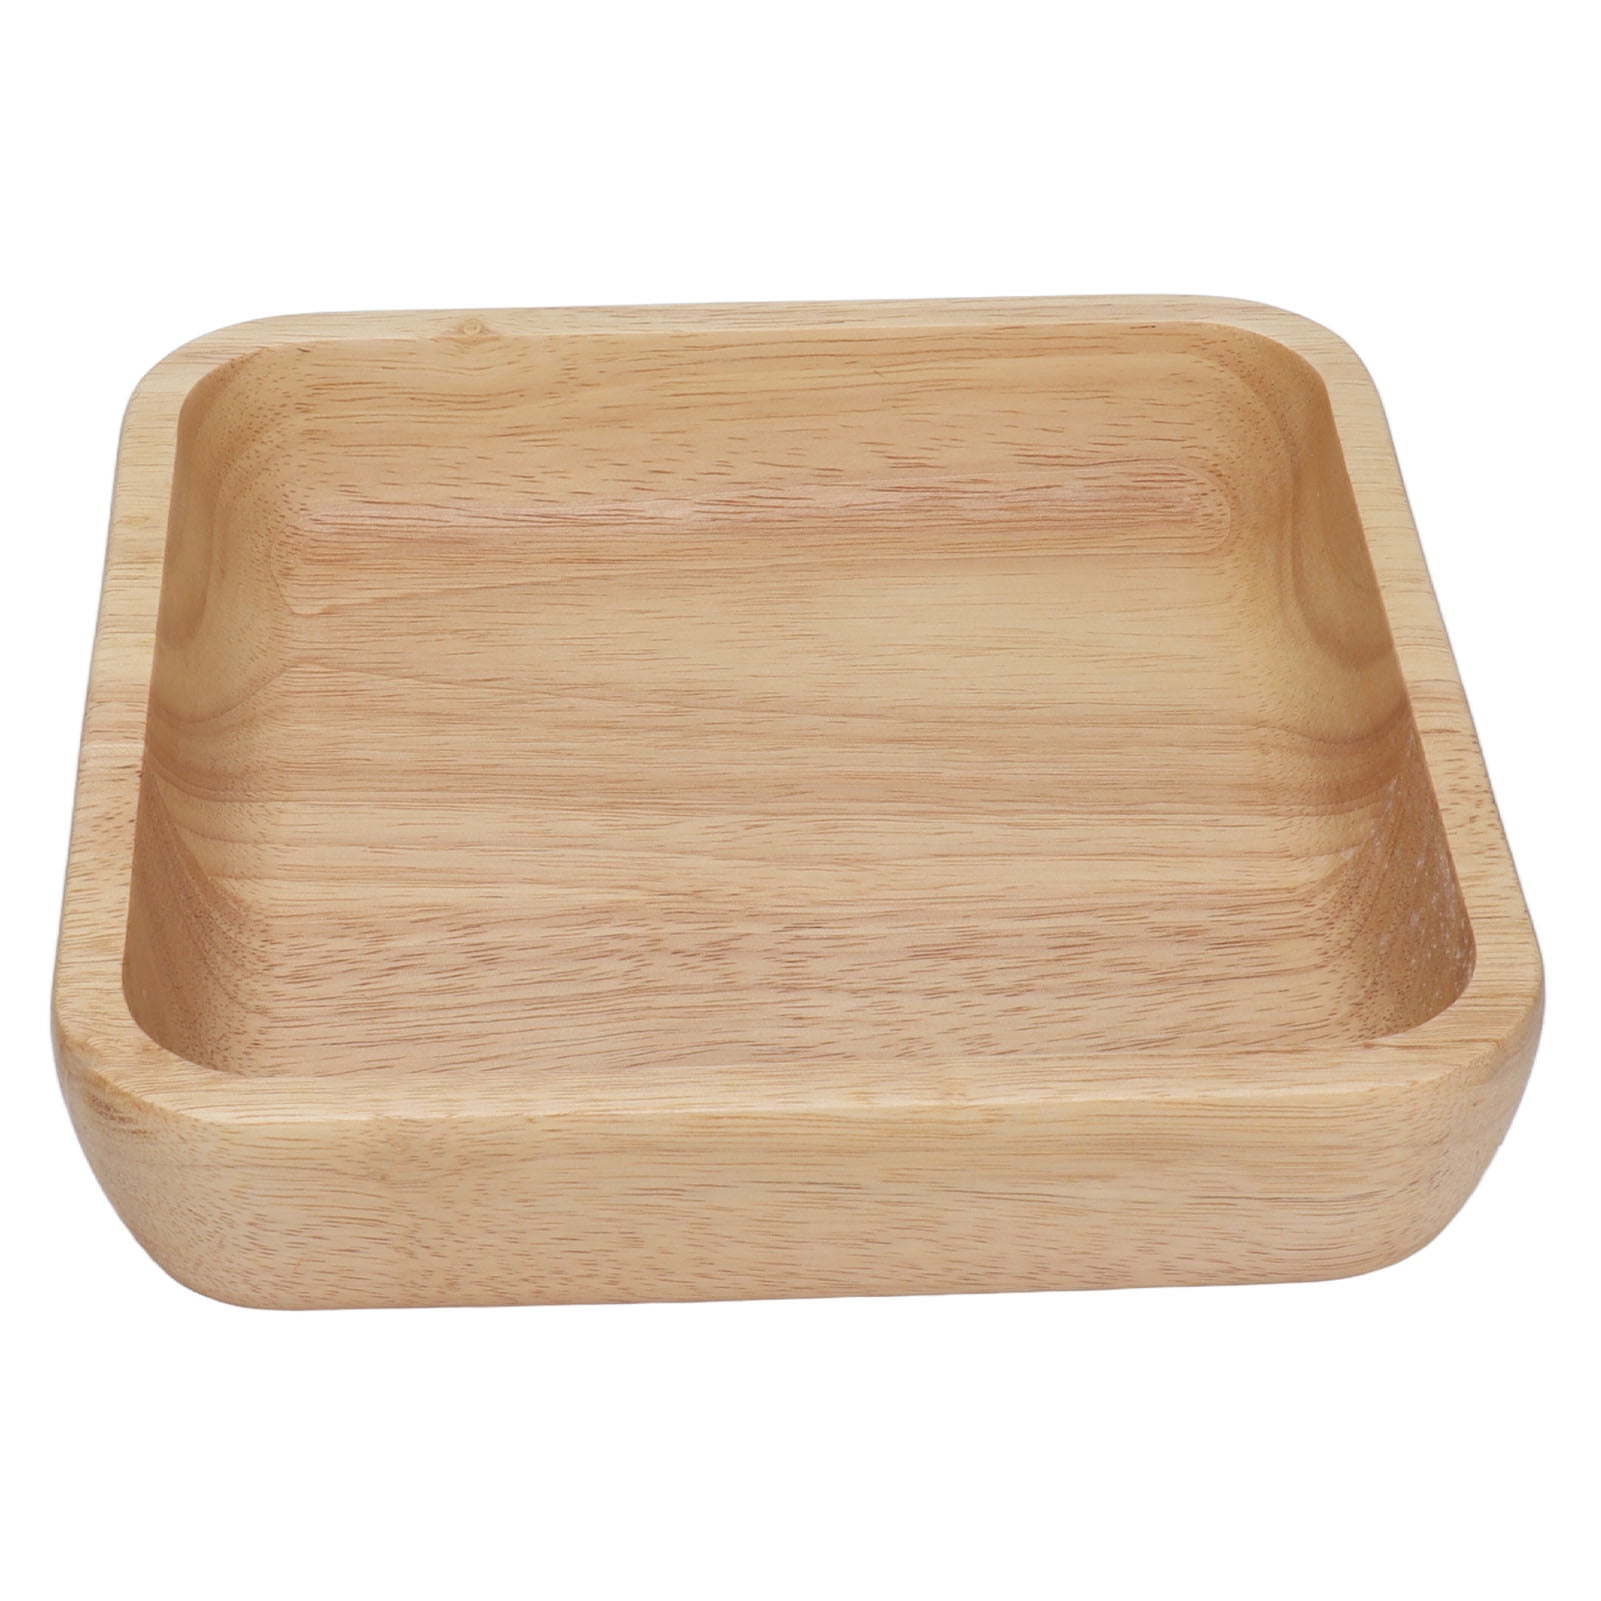 Large DELUXE Trimming Rolling Serving Tray wood melamine limited edition 17x13 